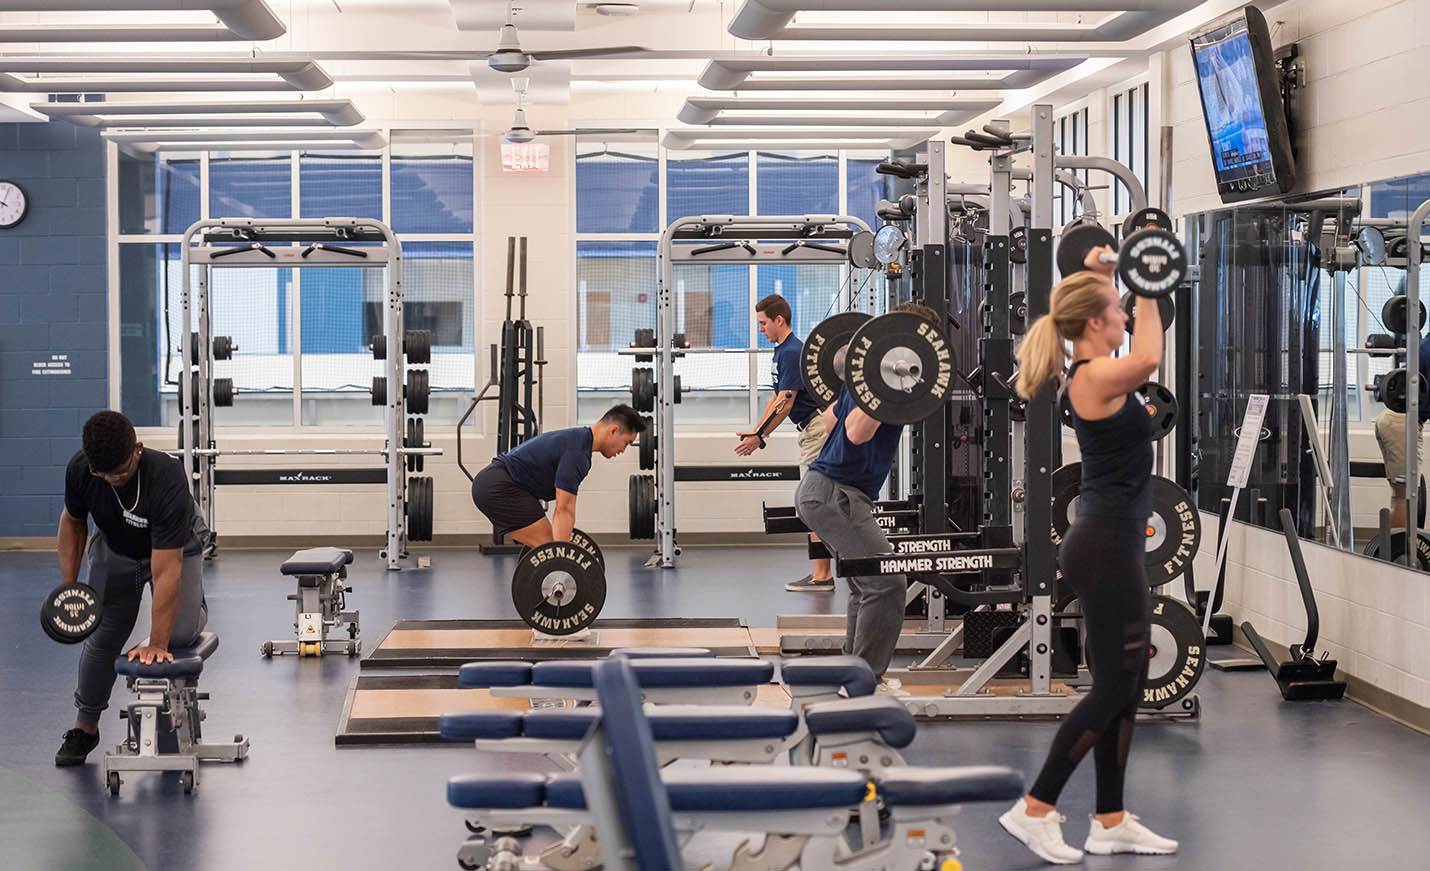 Several students lift weights in the student recreation center gym.